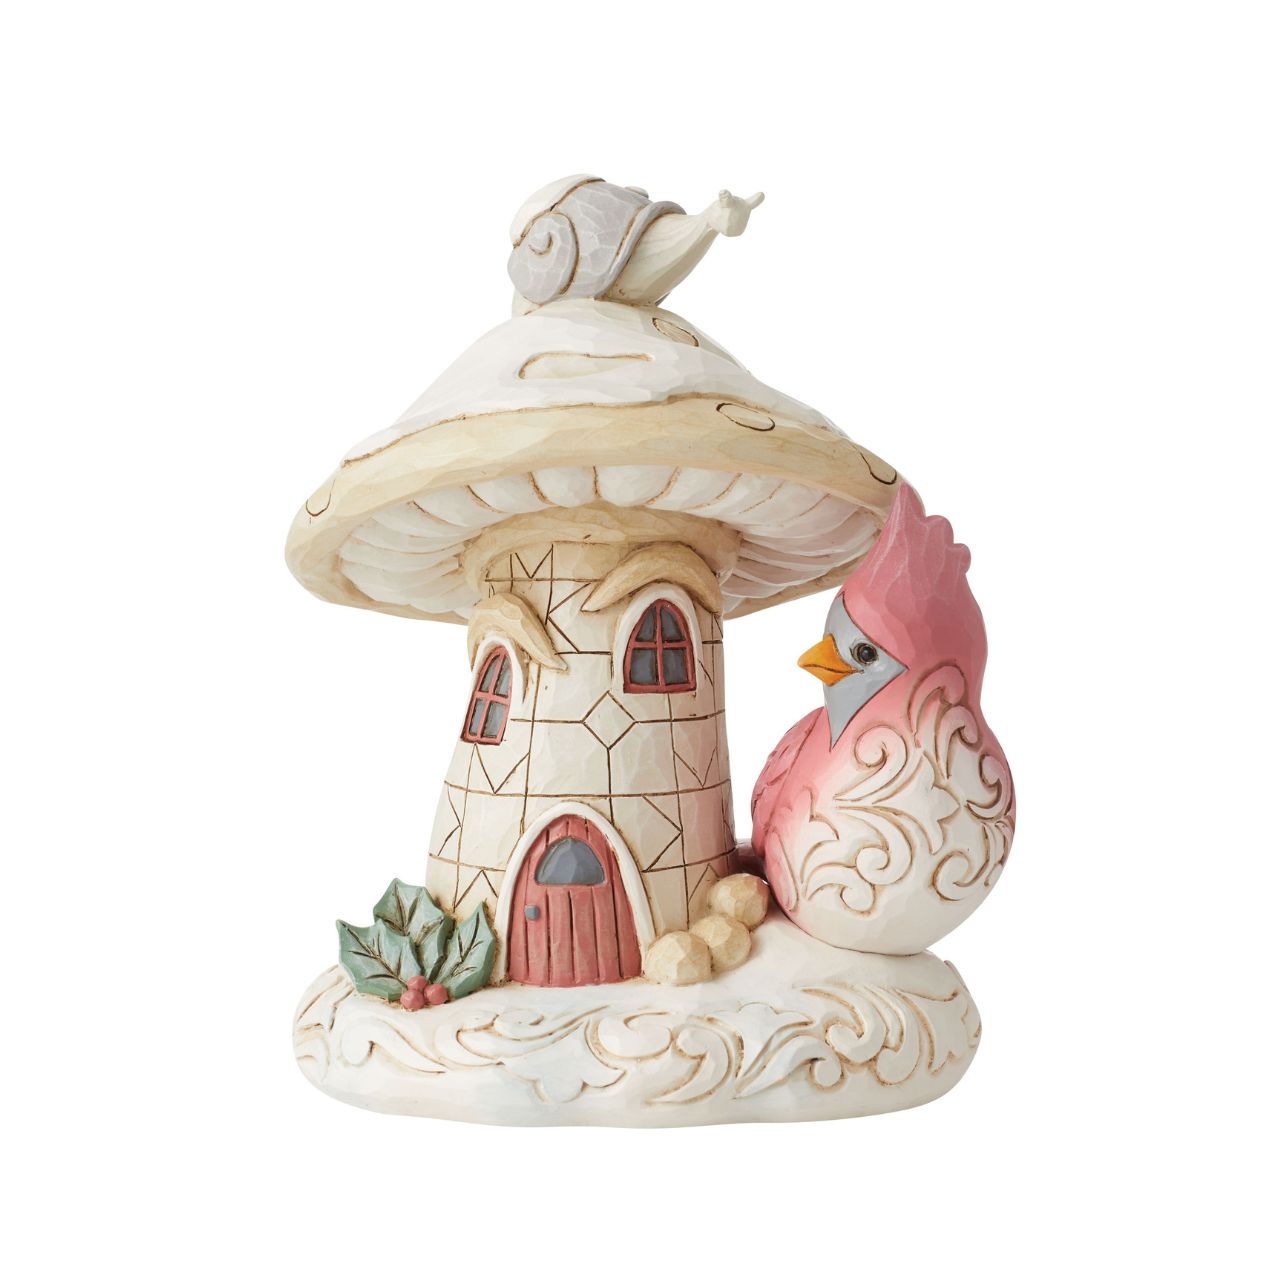 Woodland Mushroom House with Cardinal Figurine by Jim Shore  "Home For the Holidays" Designed in the iconic style of Jim Shore. This mushroom house is inhabited by woodland creatures ready to settle down in comfort for the festive season. Hand painted in high quality cast stone. 